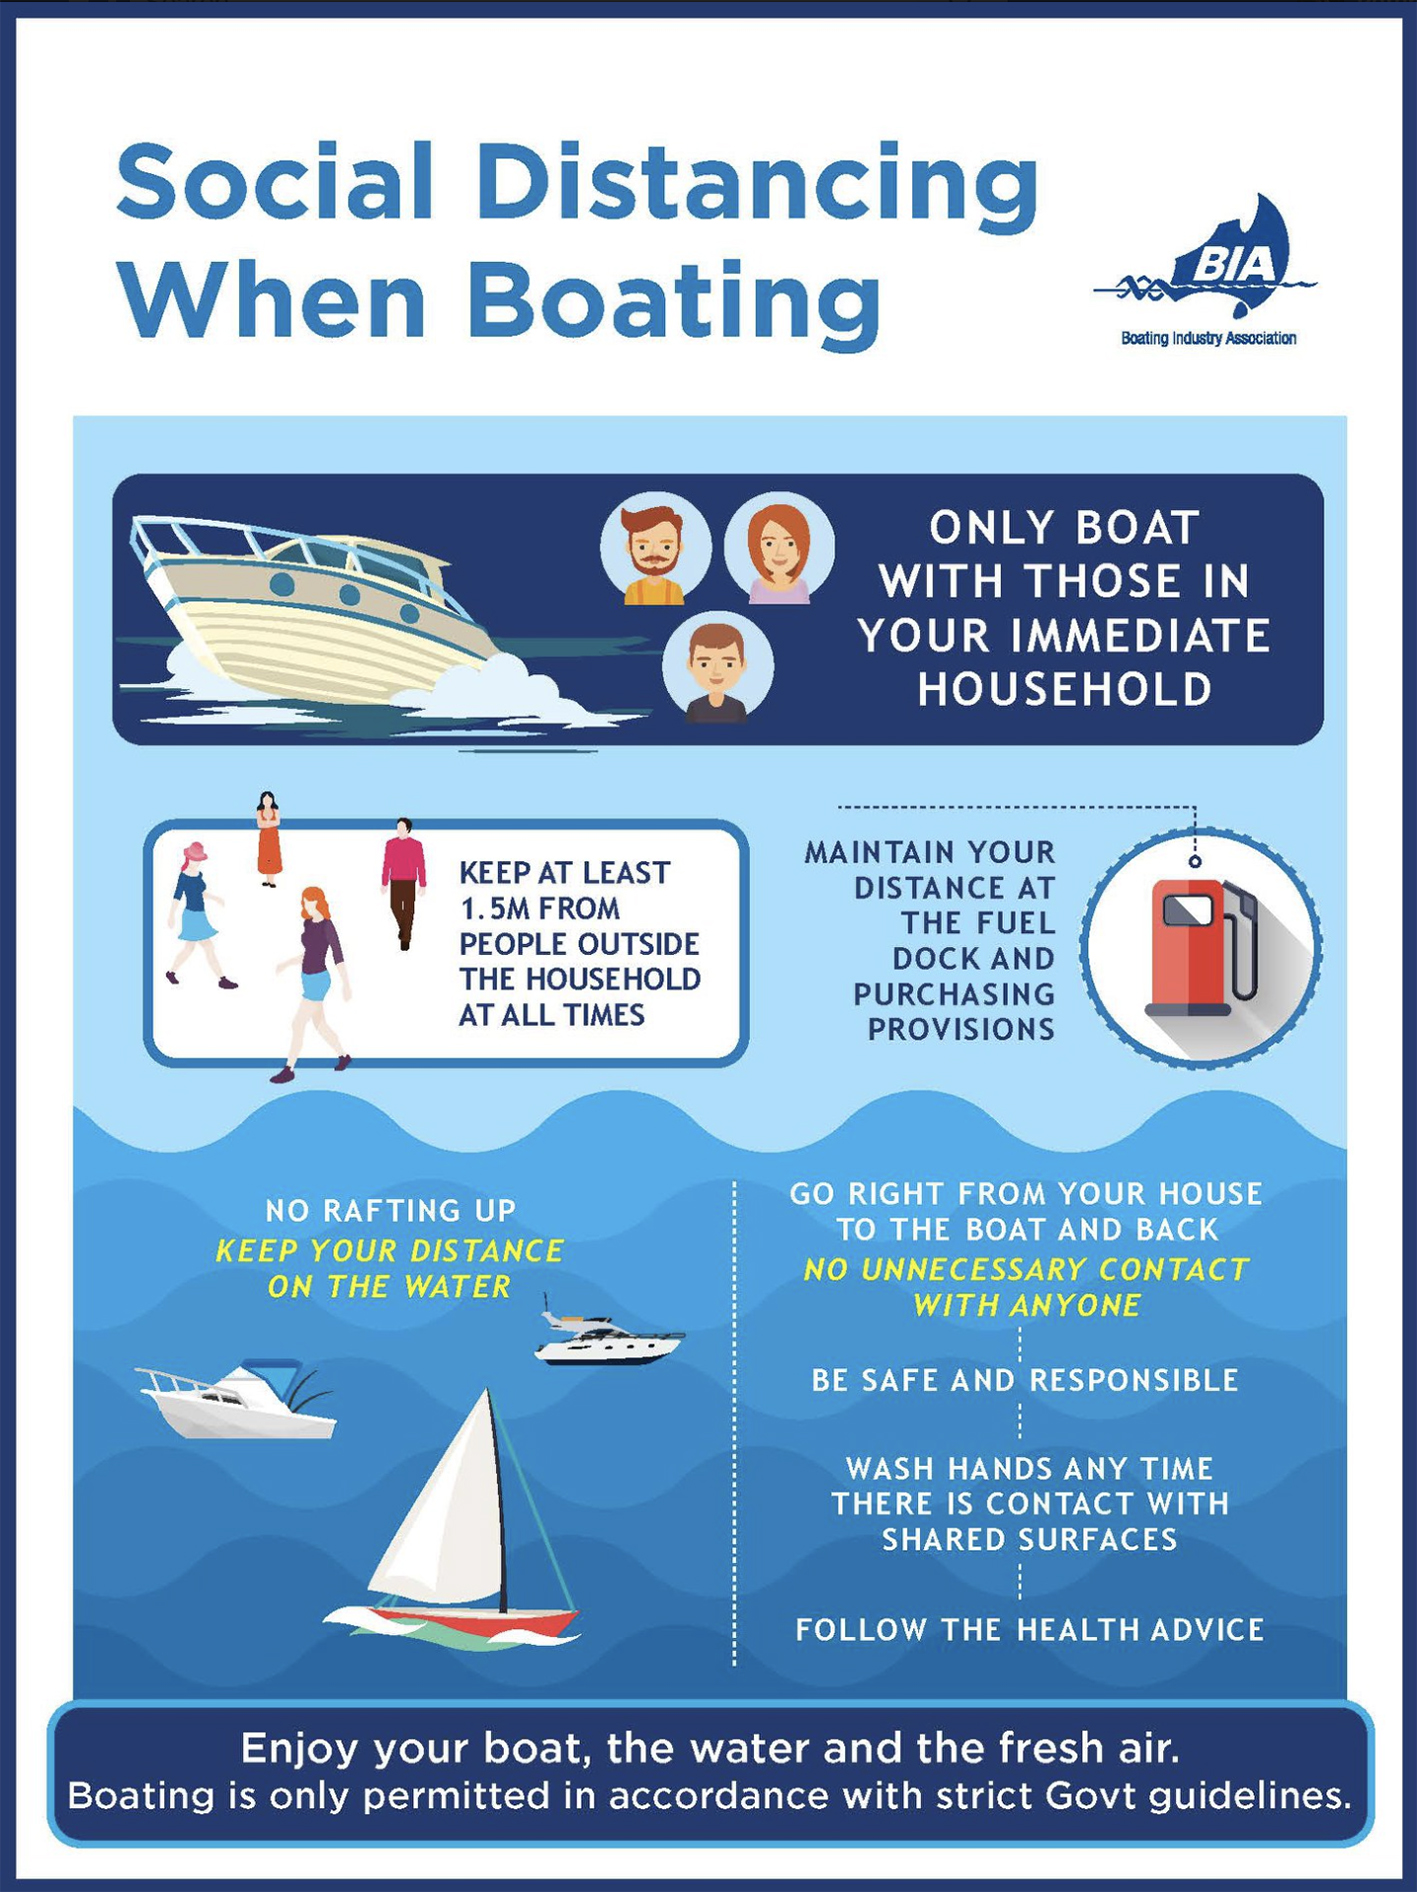 Social distancing while boating